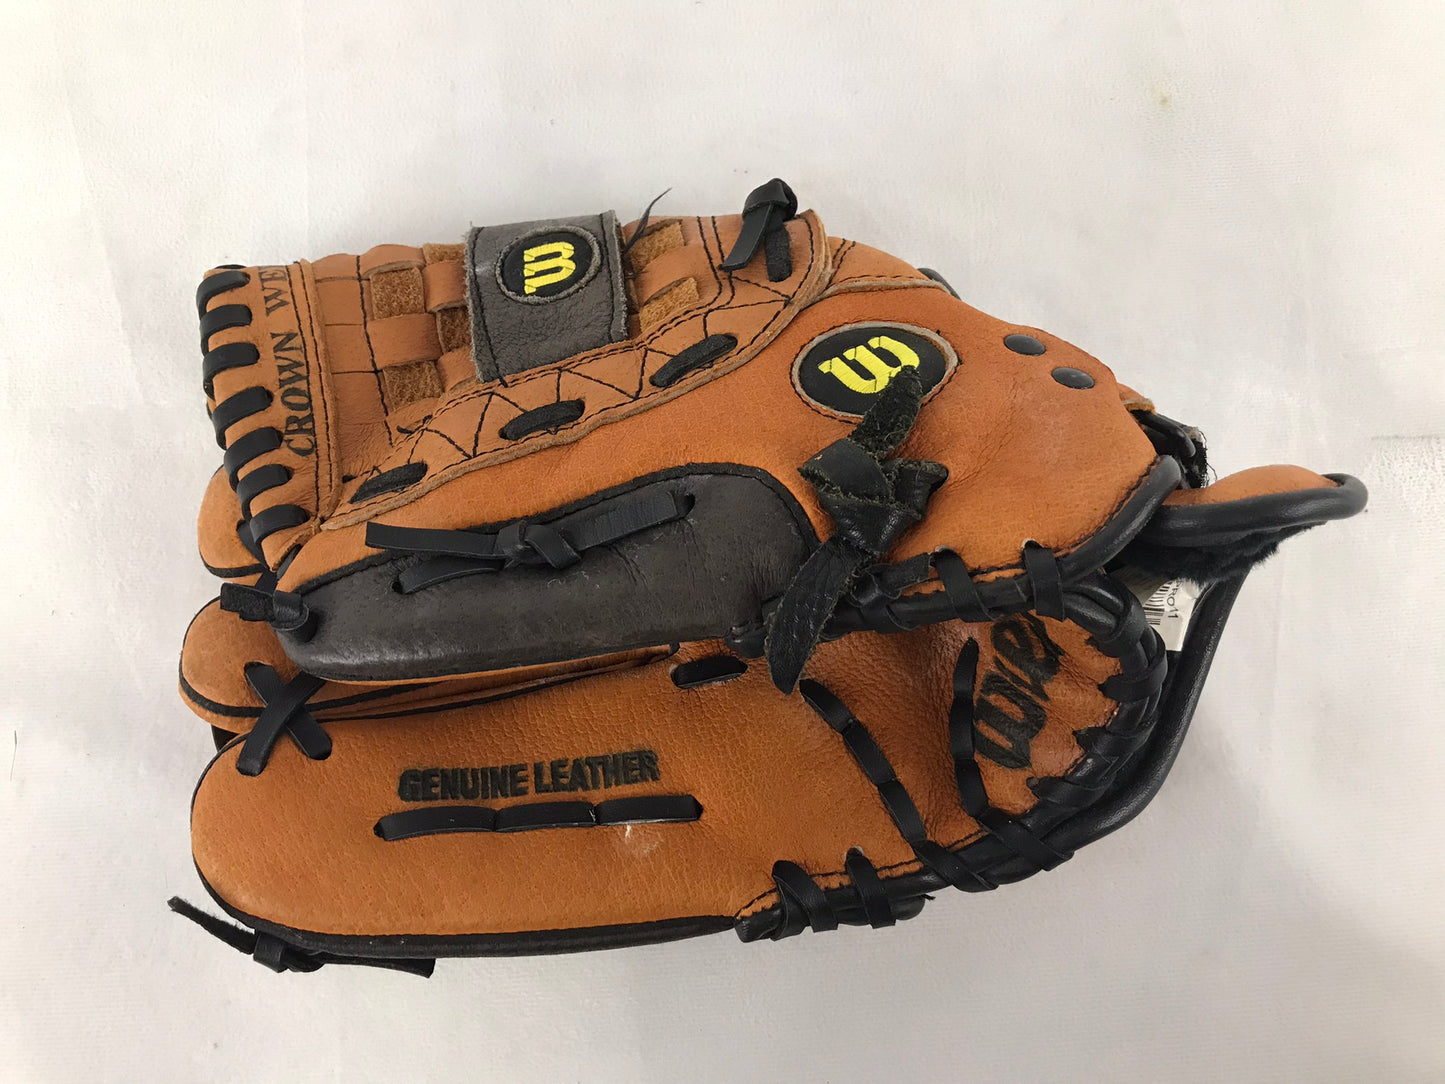 Baseball Glove Child Size 11 inch  Wilson Leather Brown Black Fits on RIGHT Hand